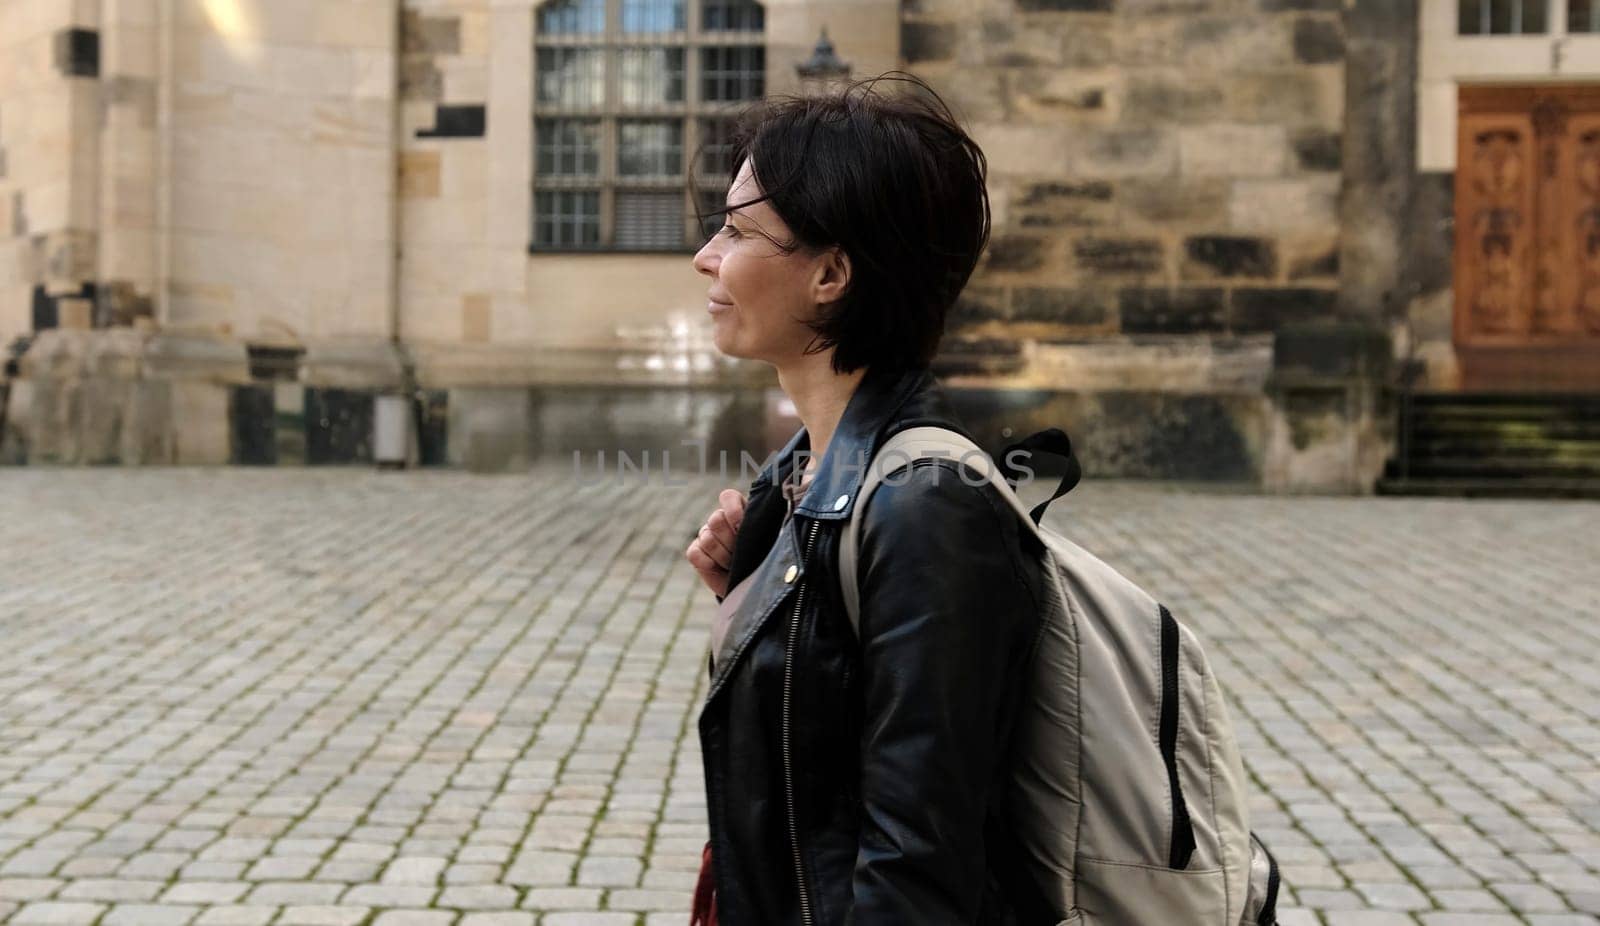 Girl Tourist, With Backpack, Explores Historical Part Of European City, Admiring Landmarks